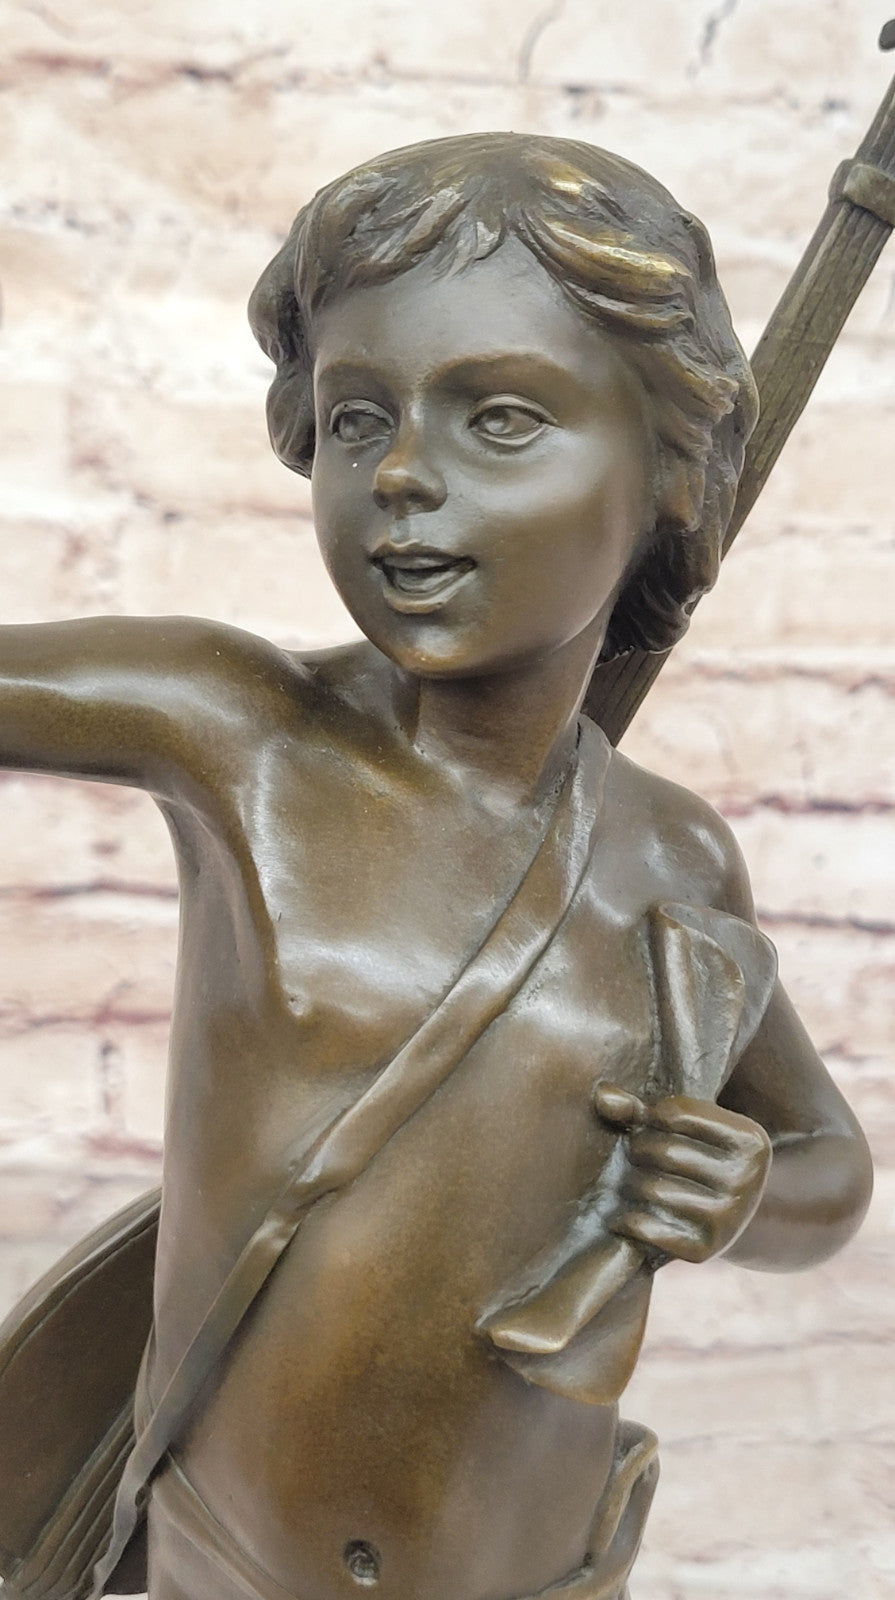 Handmade Bronze Statue by Moreau: Young Boy with Lute Banjo, Museum Quality